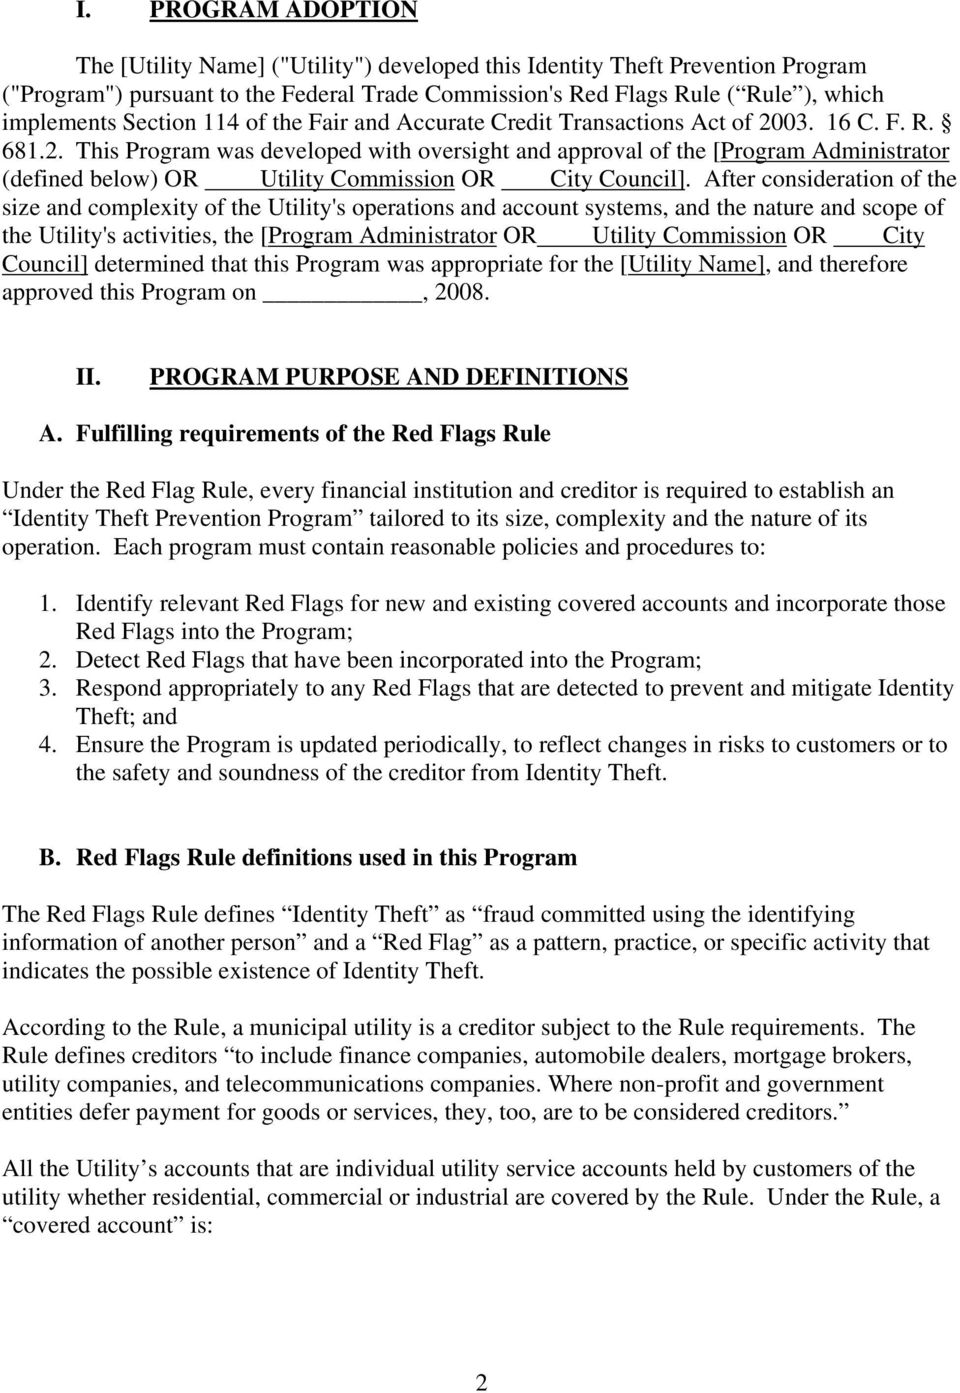 03. 16 C. F. R. 681.2. This Program was developed with oversight and approval of the [Program Administrator (defined below) OR Utility Commission OR City Council].